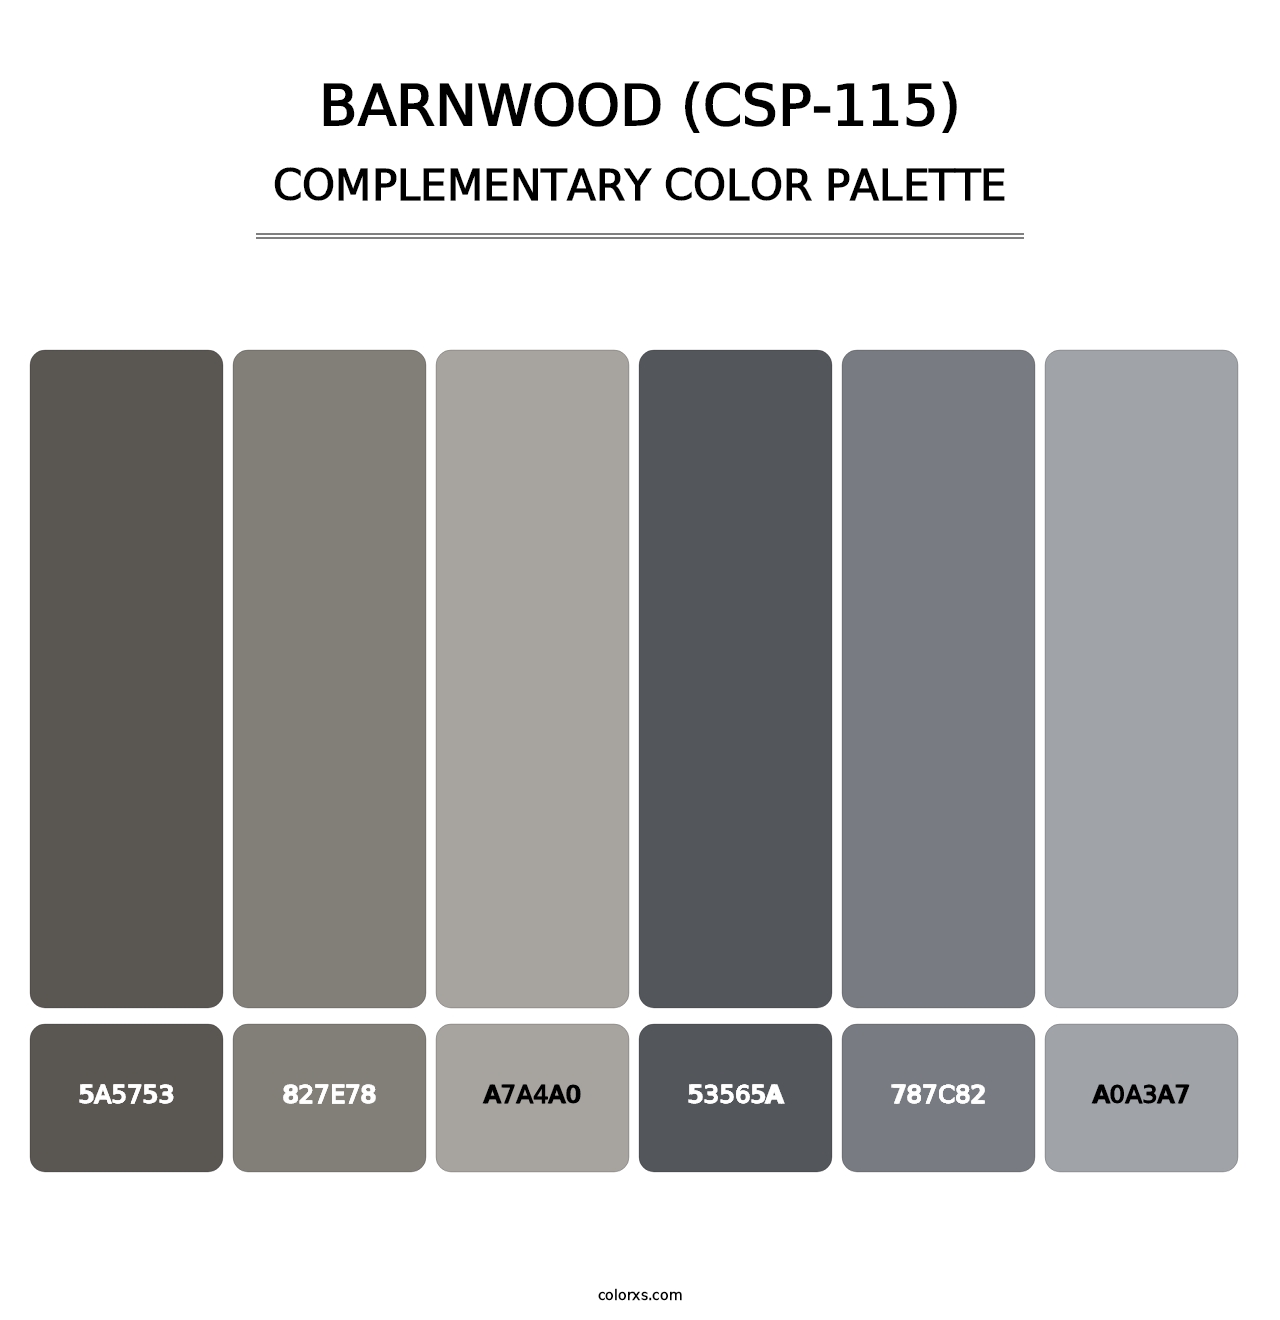 Barnwood (CSP-115) - Complementary Color Palette